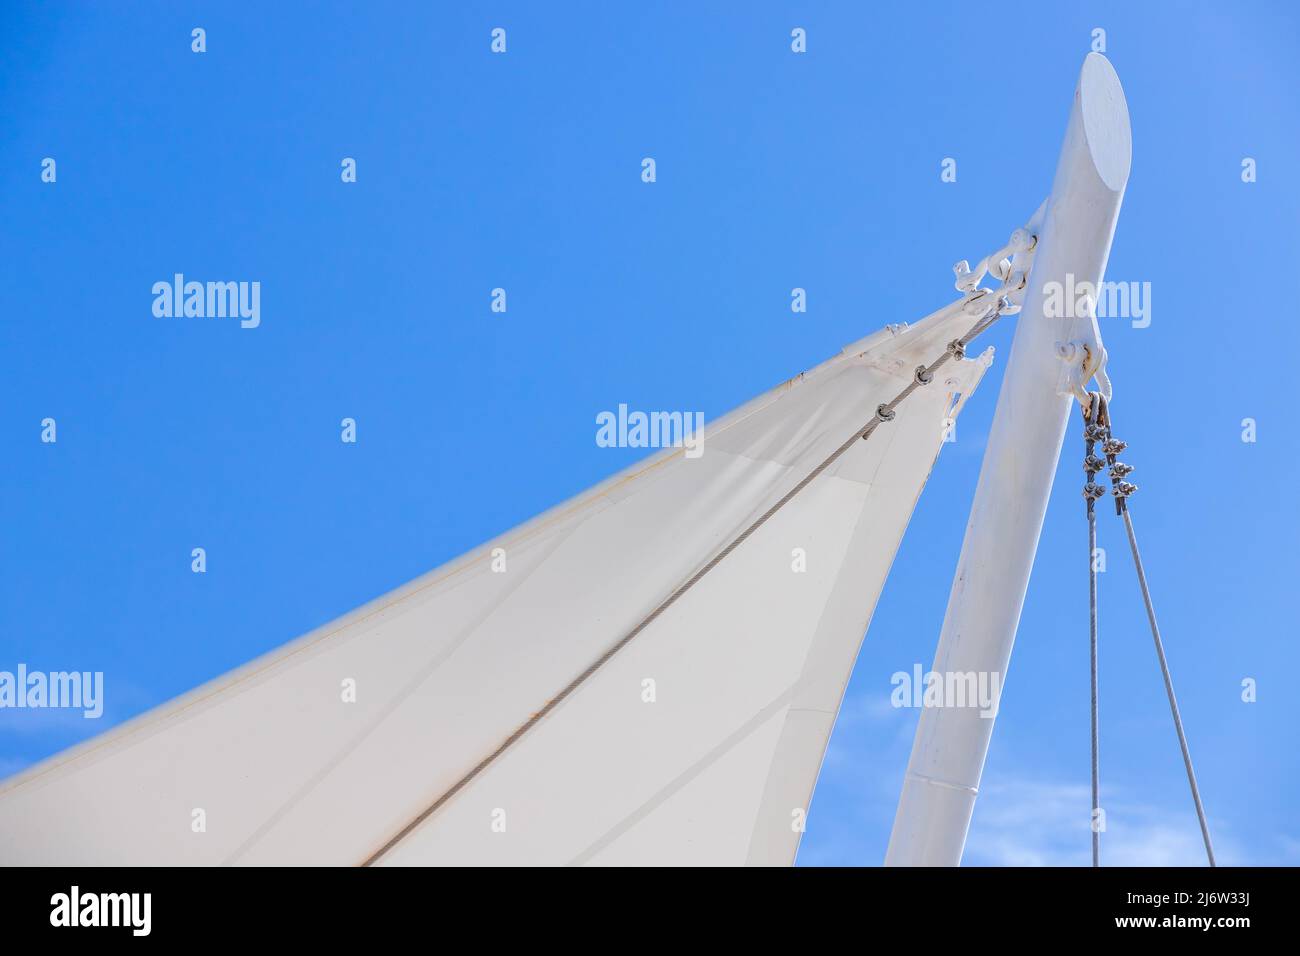 White awning in a sail shape is under blue sky, beach resort background Stock Photo